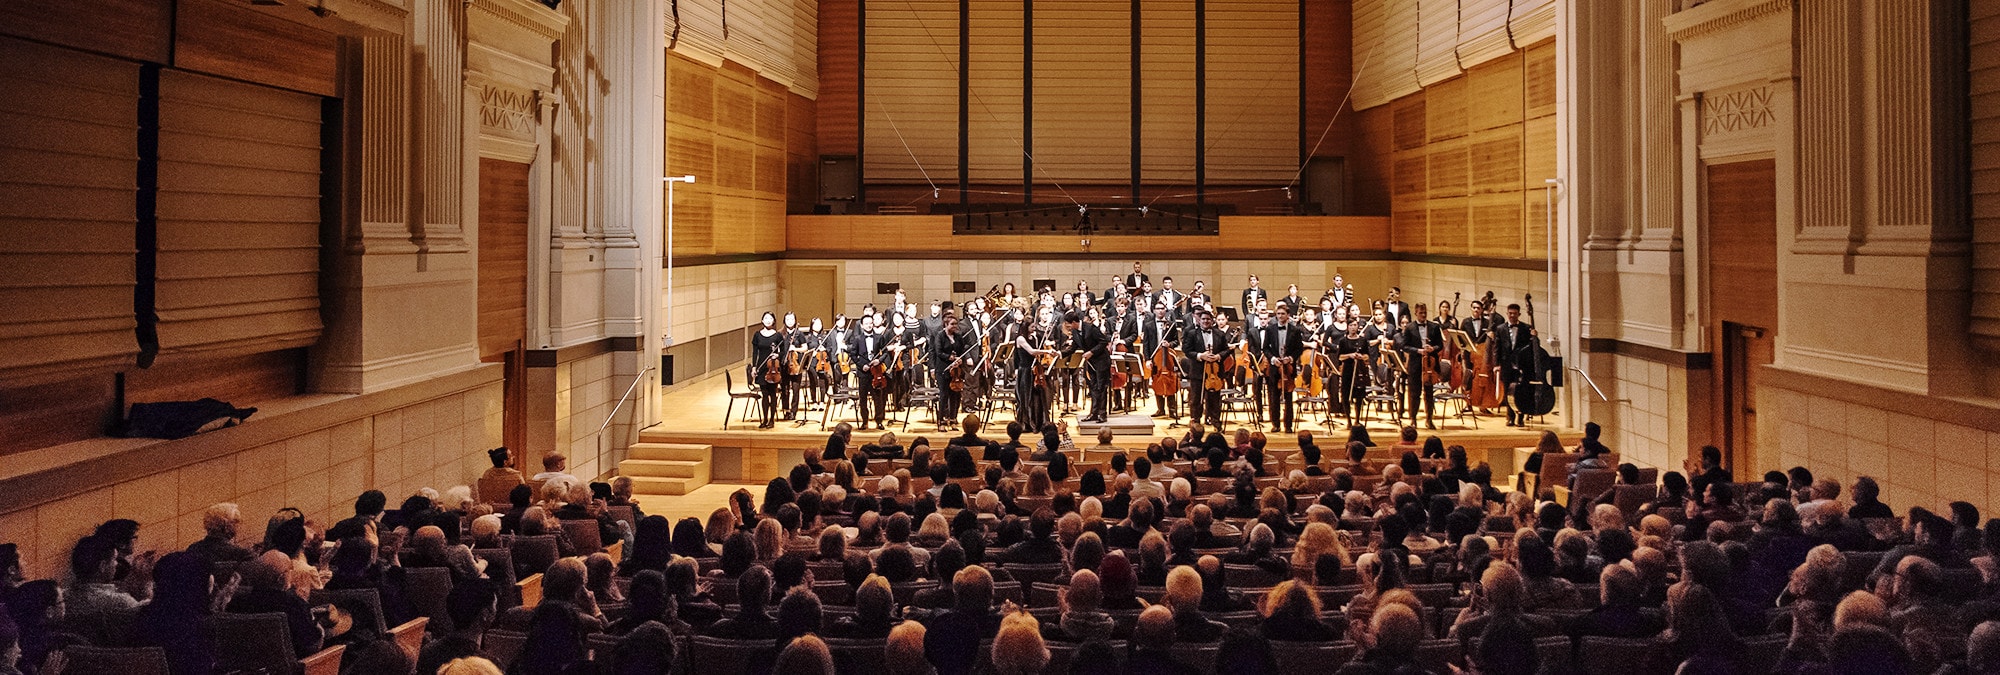 Caroline H. Hume Concert Hall performance orchestra full house wide panoramic